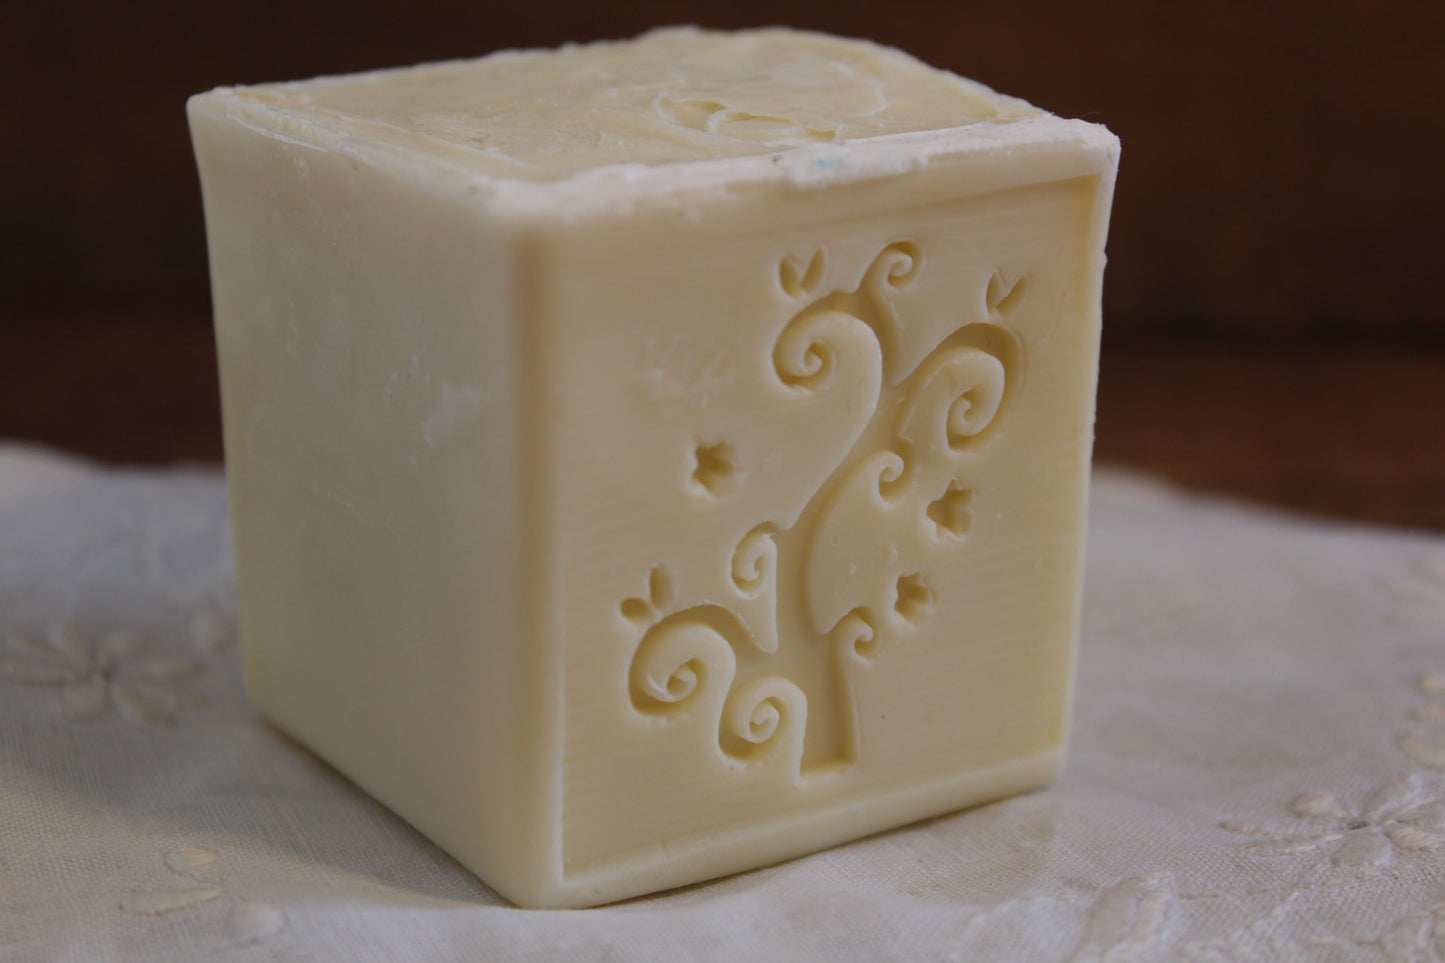 Delicate Pine Wool Wash Soap from Ancestral French Soaps